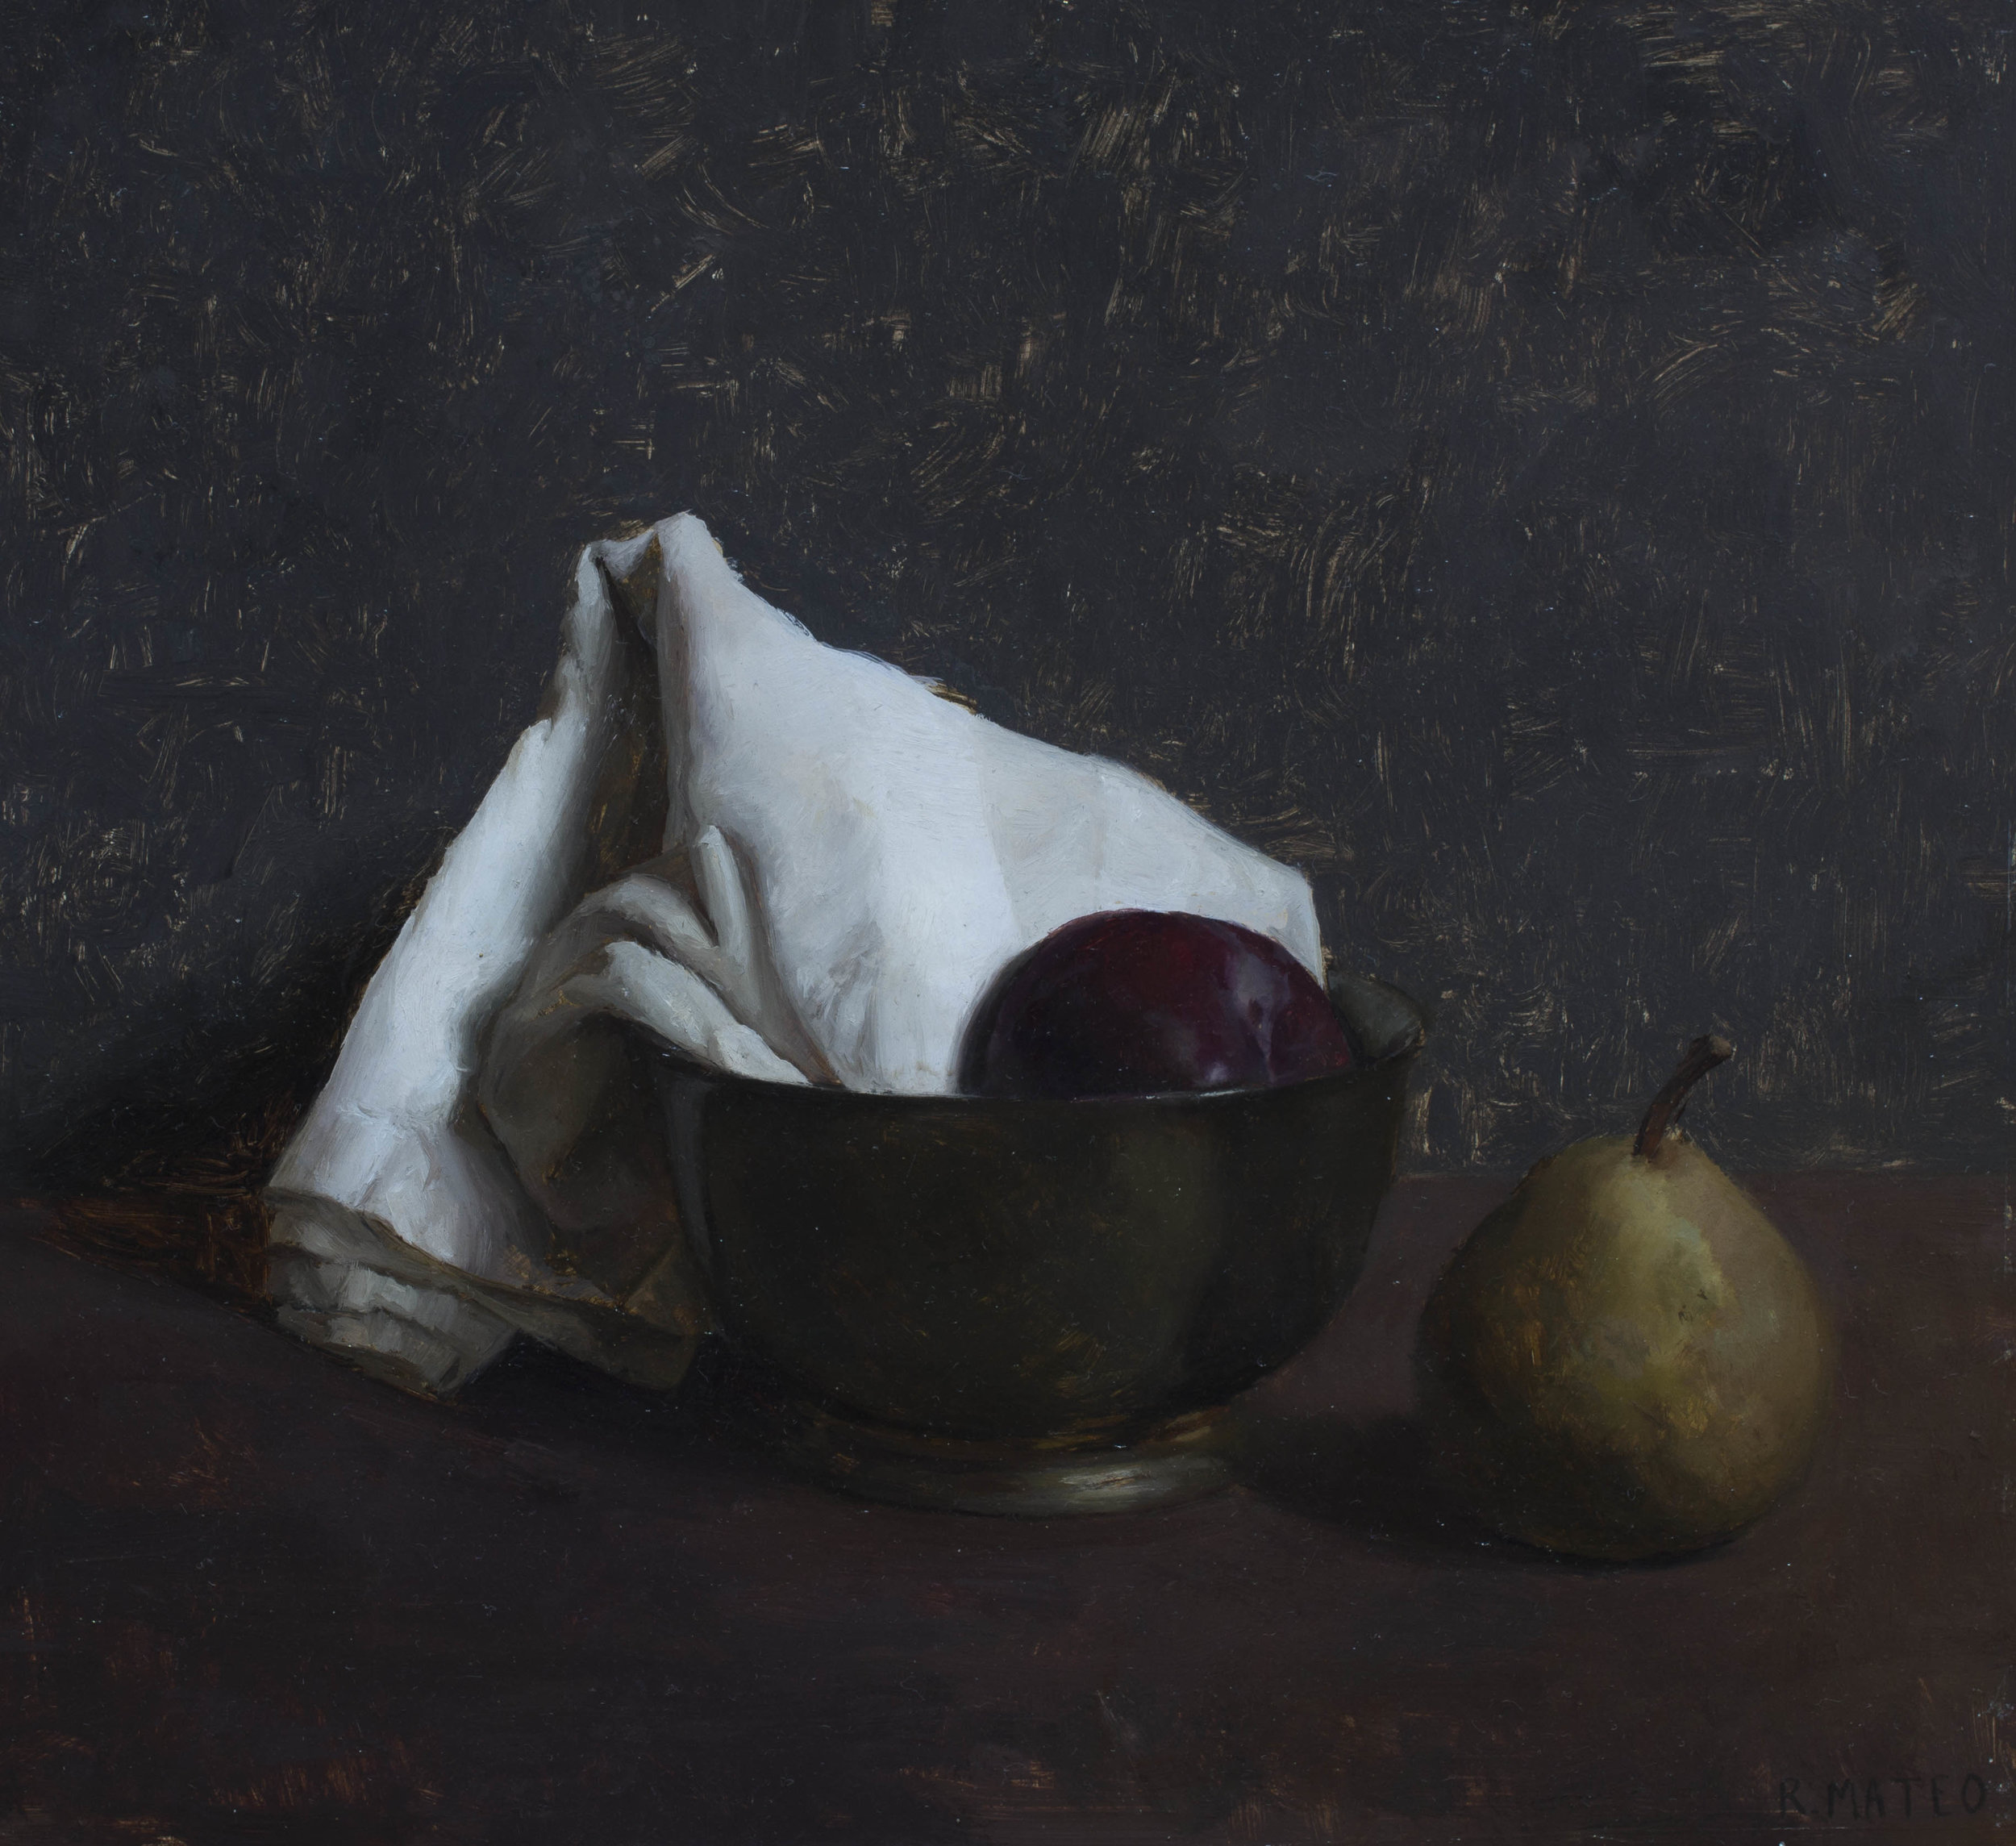 Bowl with Fruit. 8x9. Oil on Panel